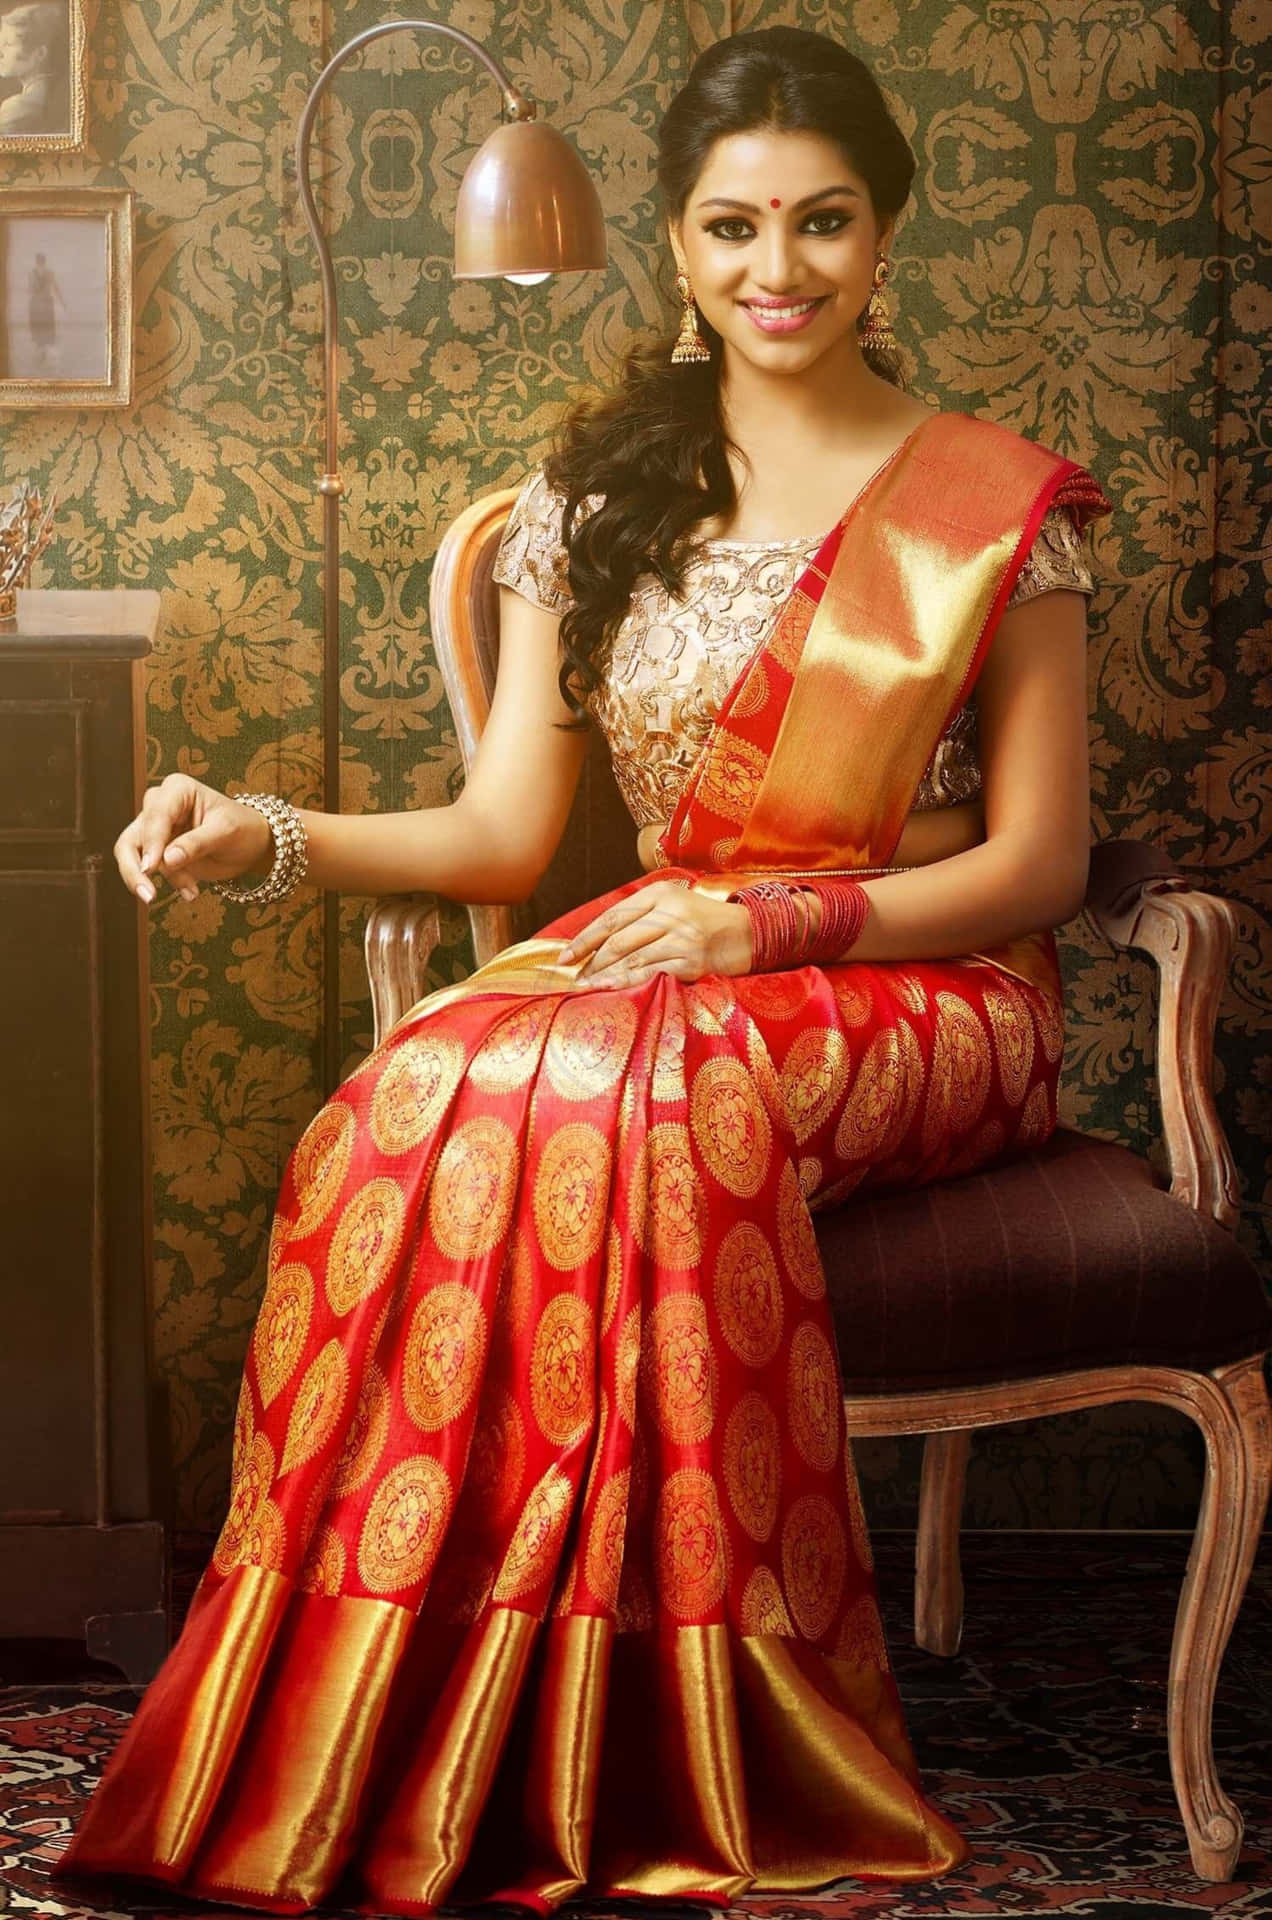 A Beautiful Woman In A Red Sari Sitting In A Chair